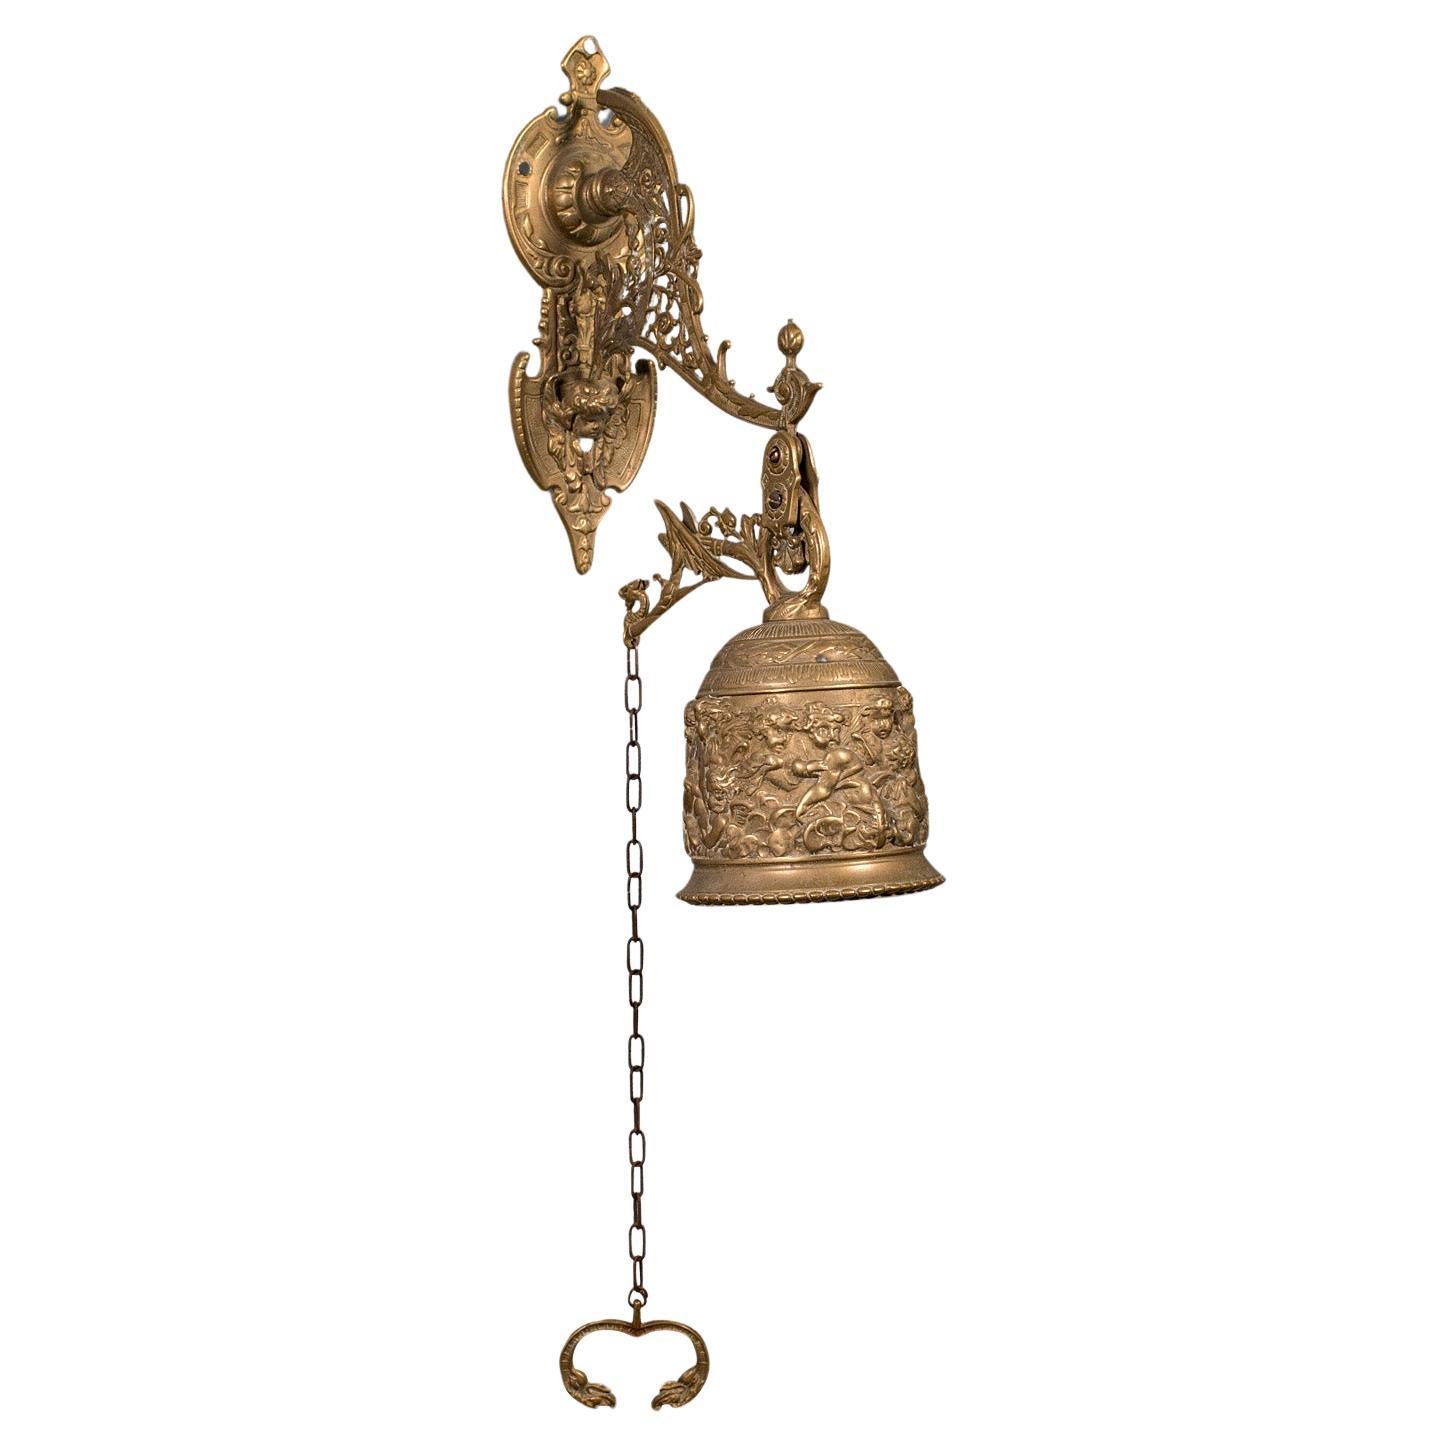 Antique School Bell, Continental, Brass, Wall Mounted Chime, Ornate, Victorian For Sale